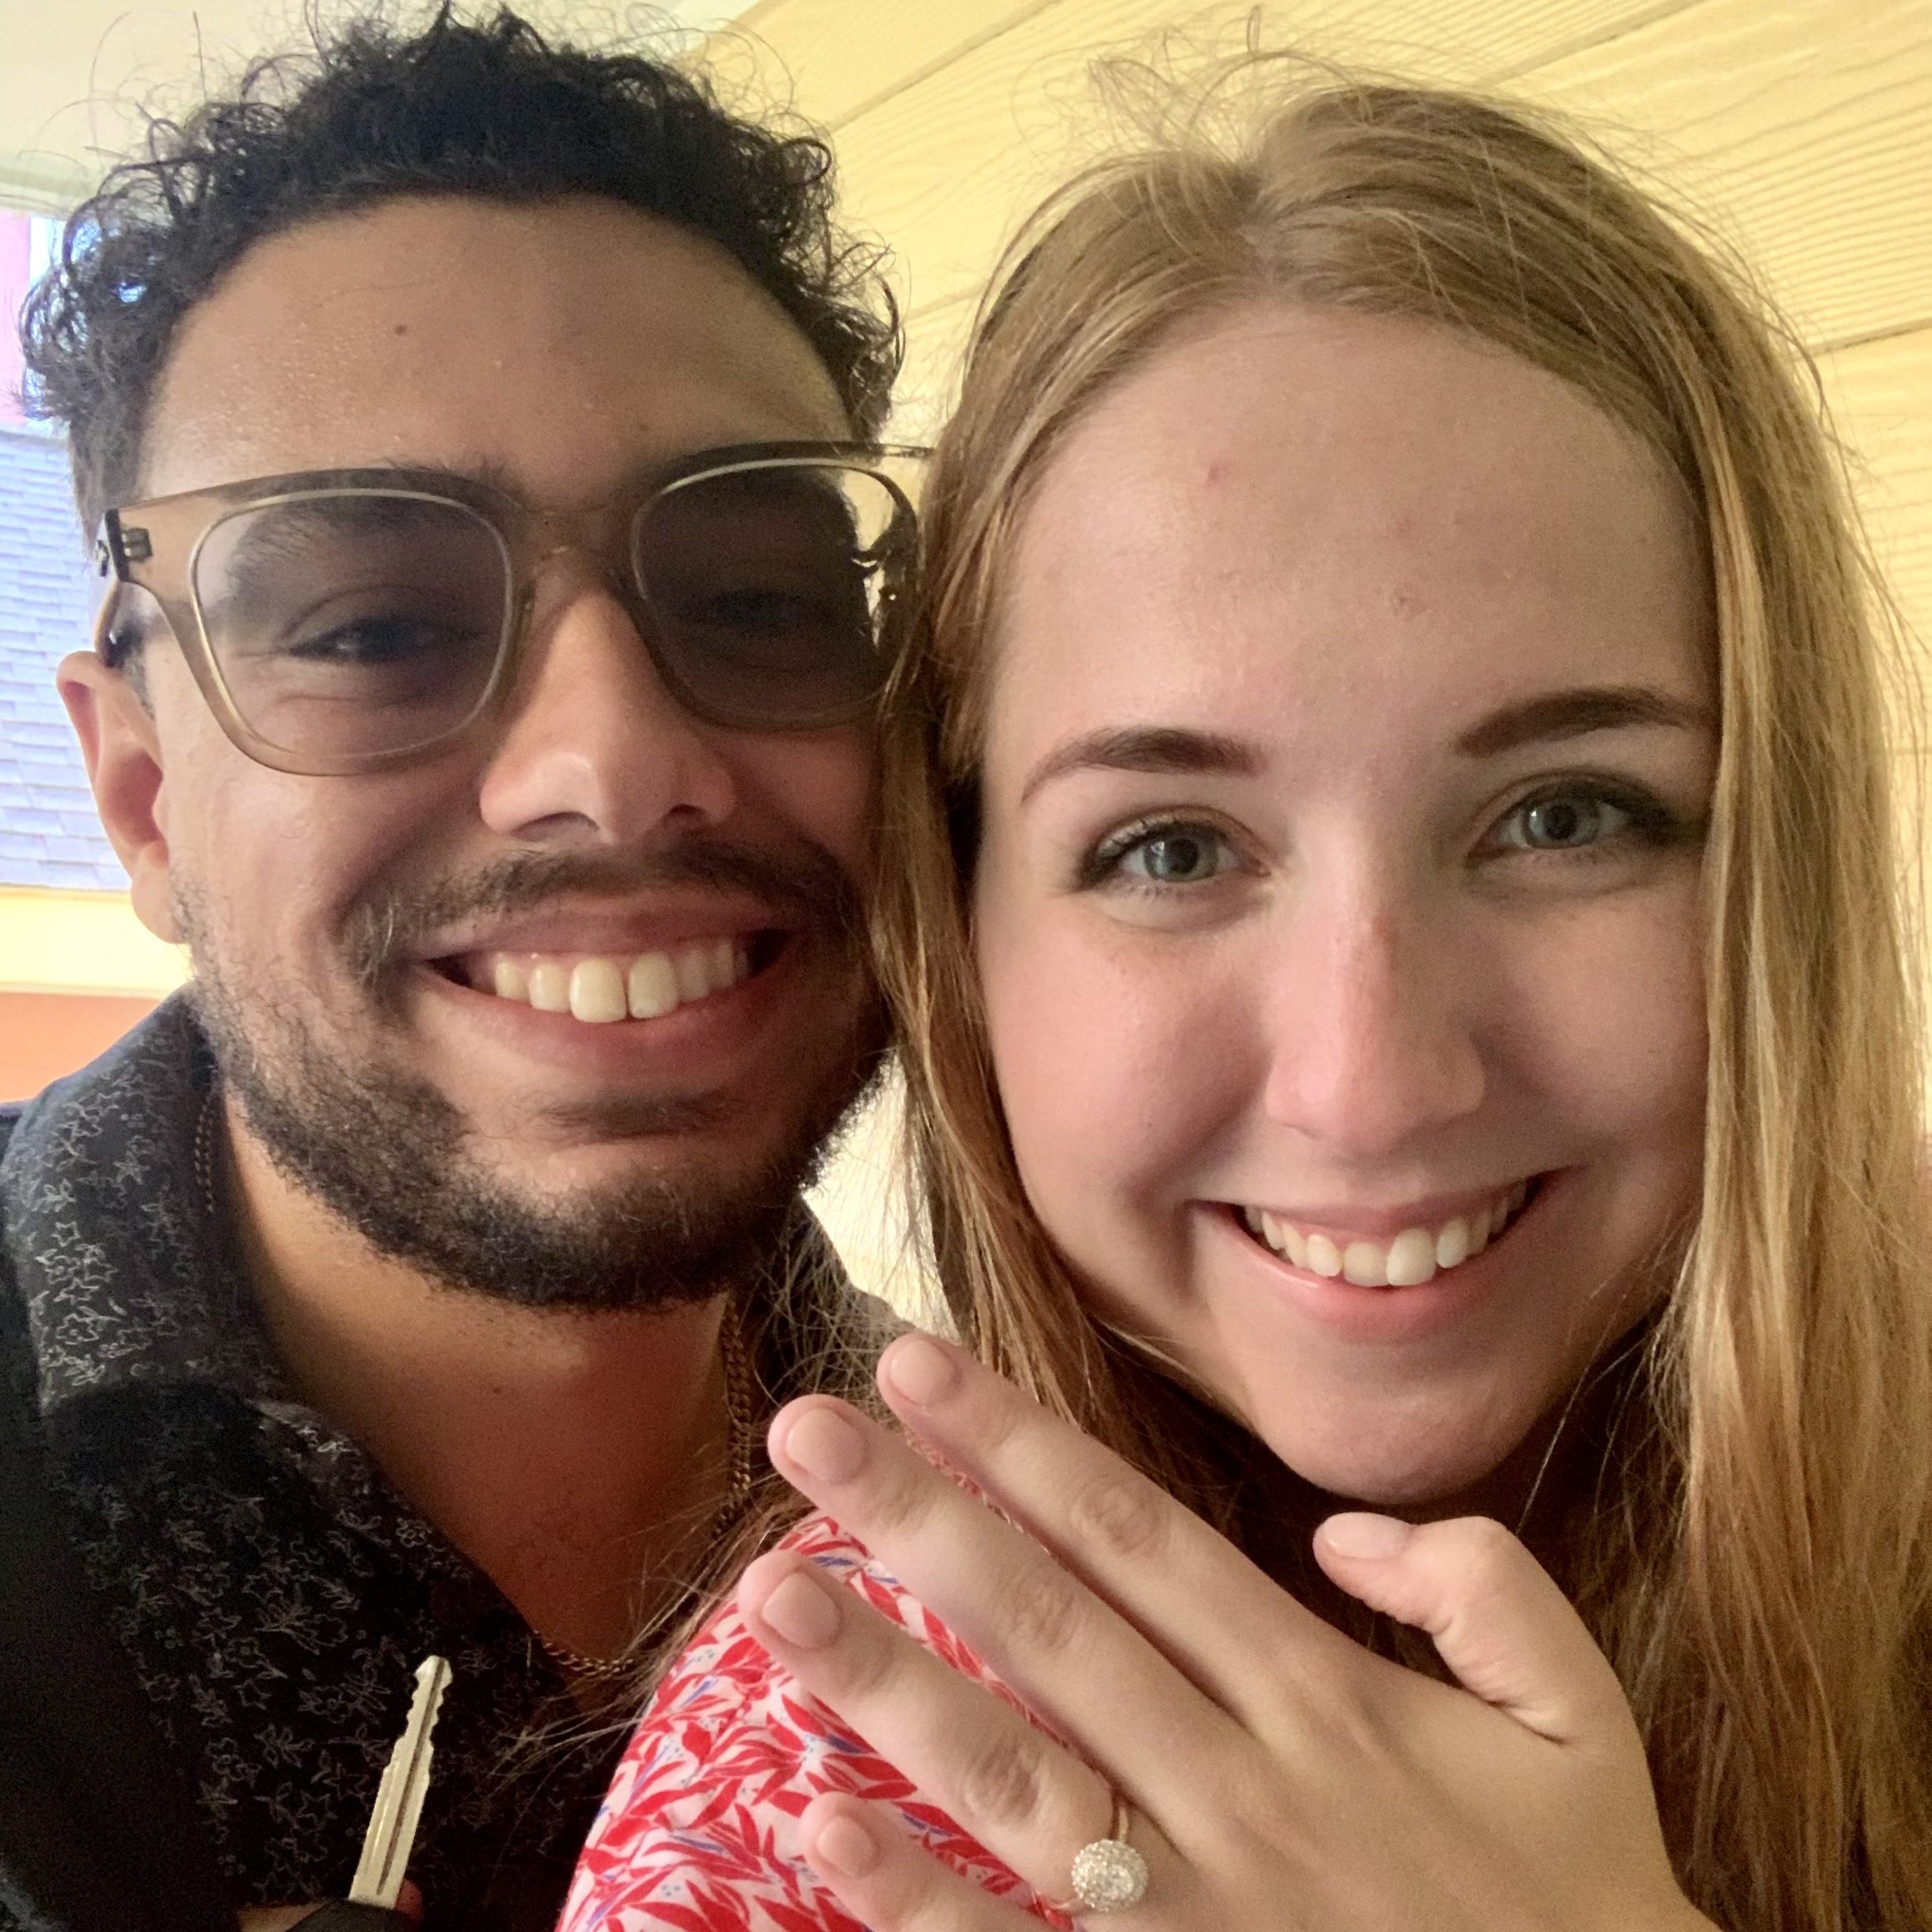 Jess and Nick are taking a selfie together with Jess's engagement ring on show. Both are smiling at the camera.